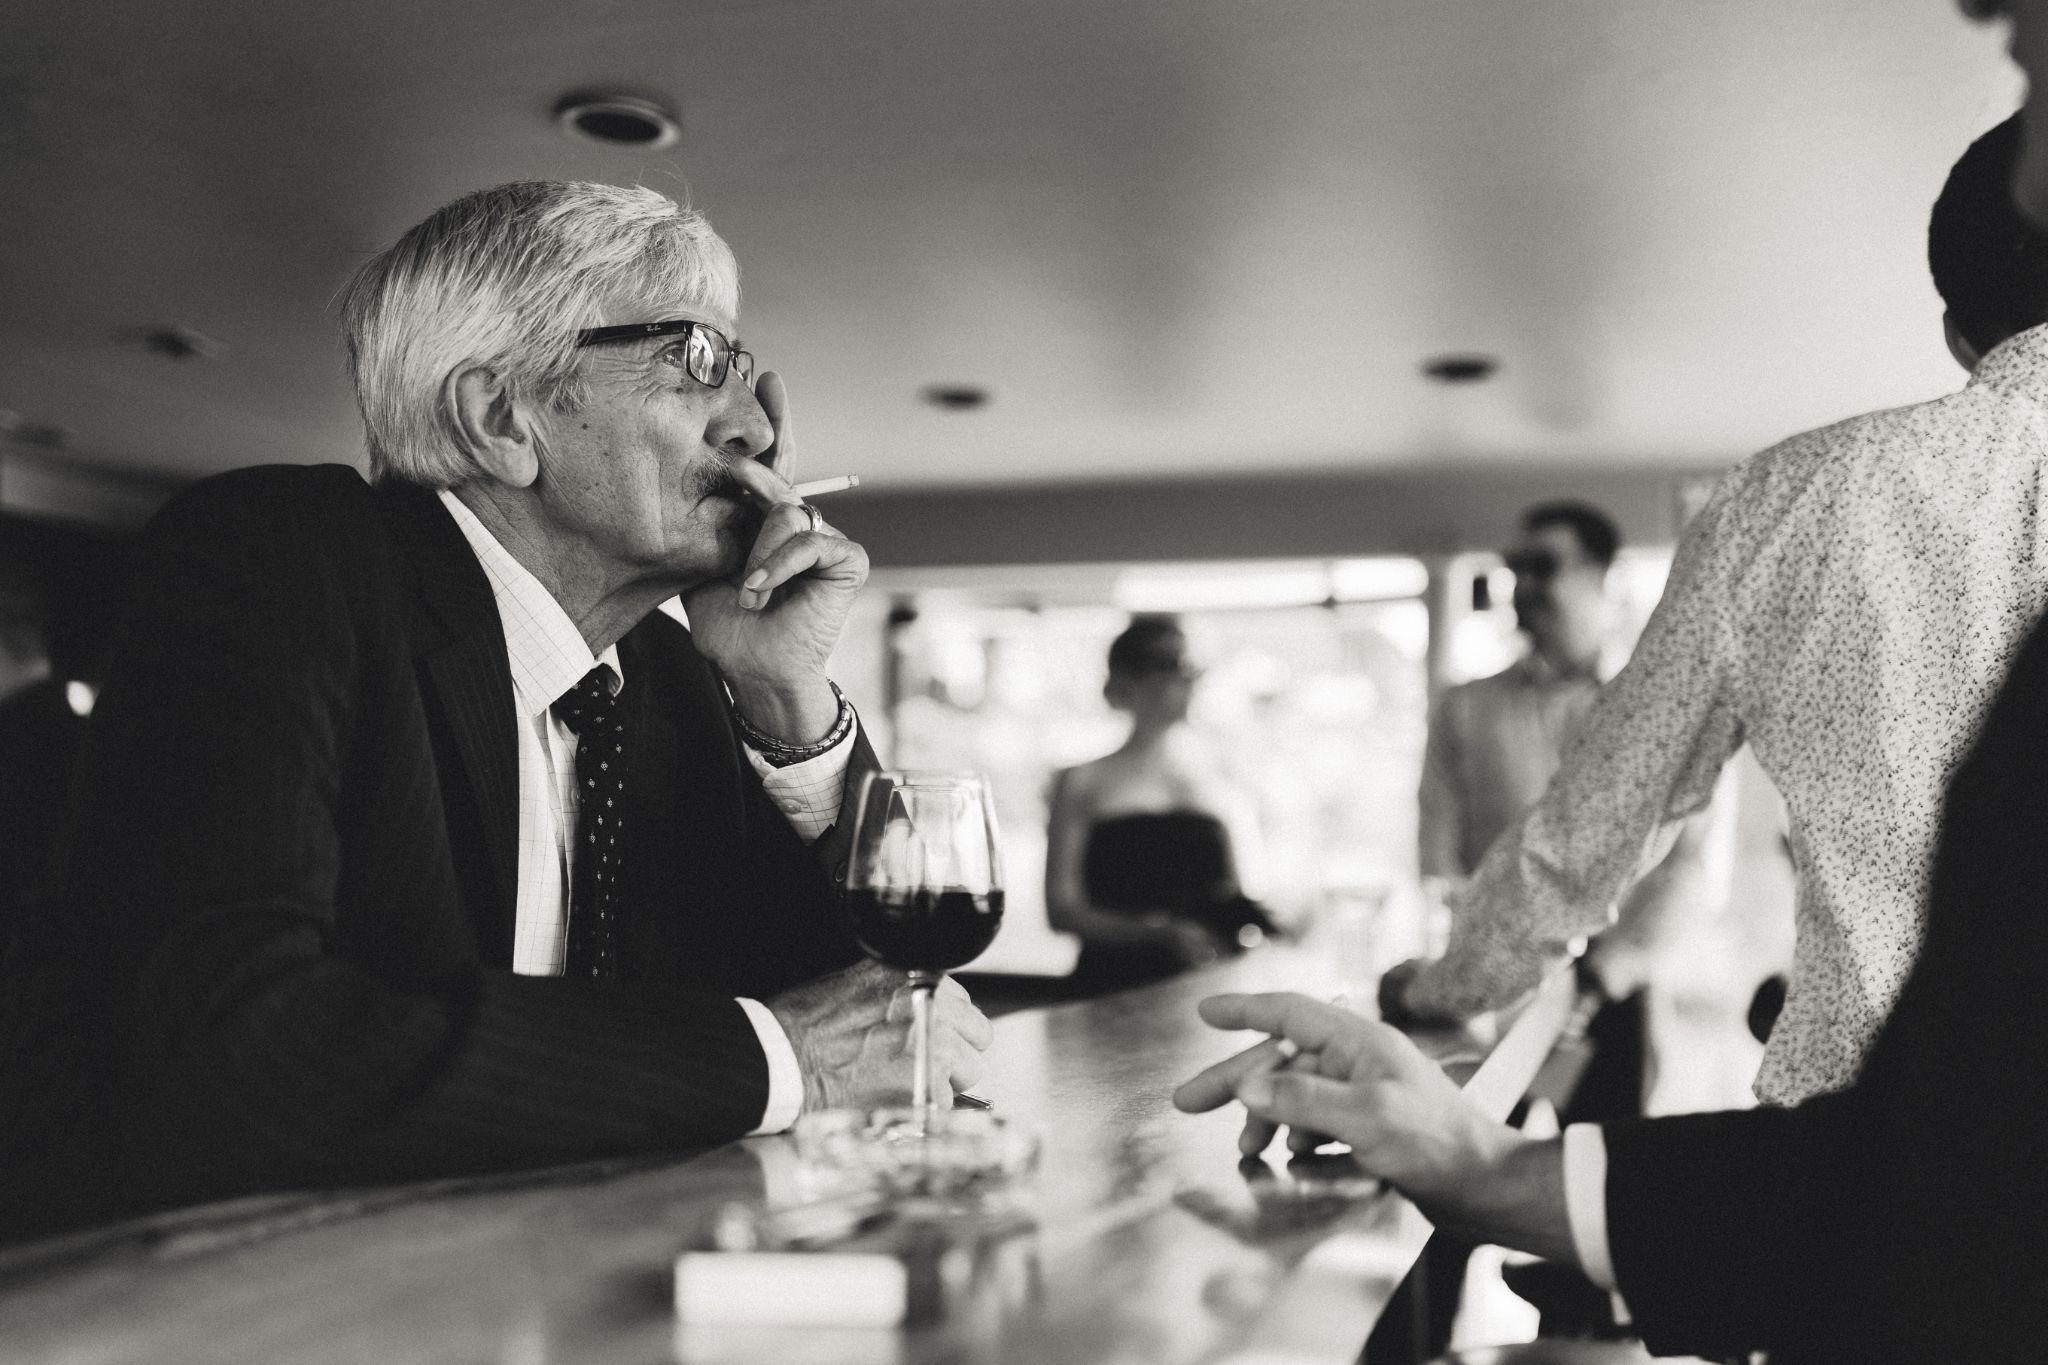 A black and white photo of an Italian man in a suit smoking a cigarette at a bar with a glass of wine.